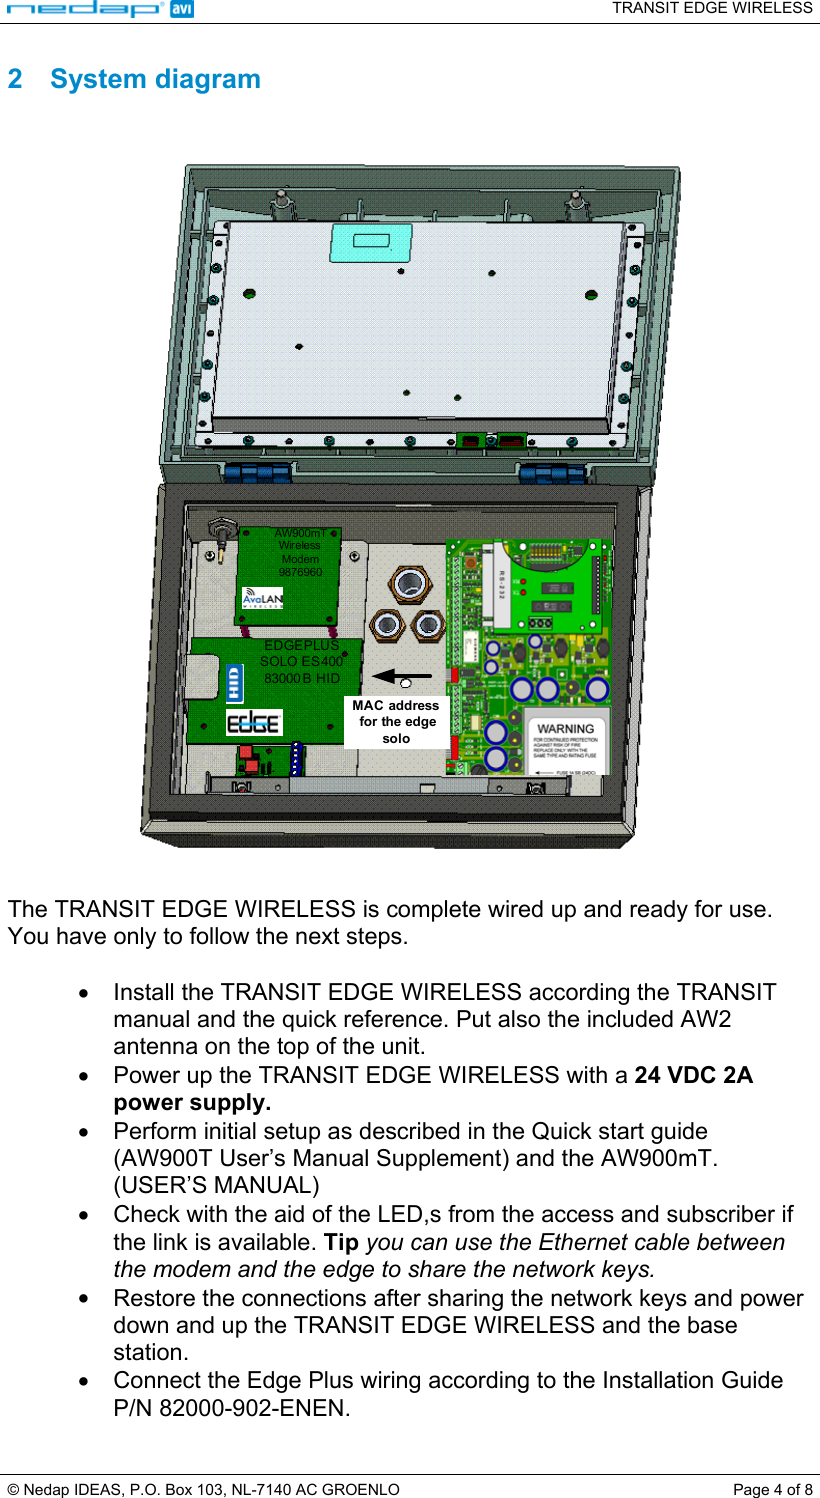   TRANSIT EDGE WIRELESS  © Nedap IDEAS, P.O. Box 103, NL-7140 AC GROENLO  Page 4 of 8 2 System diagram   AW900mTWireless Modem9876960EDGEPLUSSOLO ES 40083000 B HIDMAC address for the edge solo   The TRANSIT EDGE WIRELESS is complete wired up and ready for use. You have only to follow the next steps.  •  Install the TRANSIT EDGE WIRELESS according the TRANSIT manual and the quick reference. Put also the included AW2 antenna on the top of the unit. •  Power up the TRANSIT EDGE WIRELESS with a 24 VDC 2A power supply. •  Perform initial setup as described in the Quick start guide (AW900T User’s Manual Supplement) and the AW900mT. (USER’S MANUAL) •  Check with the aid of the LED,s from the access and subscriber if the link is available. Tip you can use the Ethernet cable between the modem and the edge to share the network keys. •  Restore the connections after sharing the network keys and power down and up the TRANSIT EDGE WIRELESS and the base station.  •  Connect the Edge Plus wiring according to the Installation Guide P/N 82000-902-ENEN. 